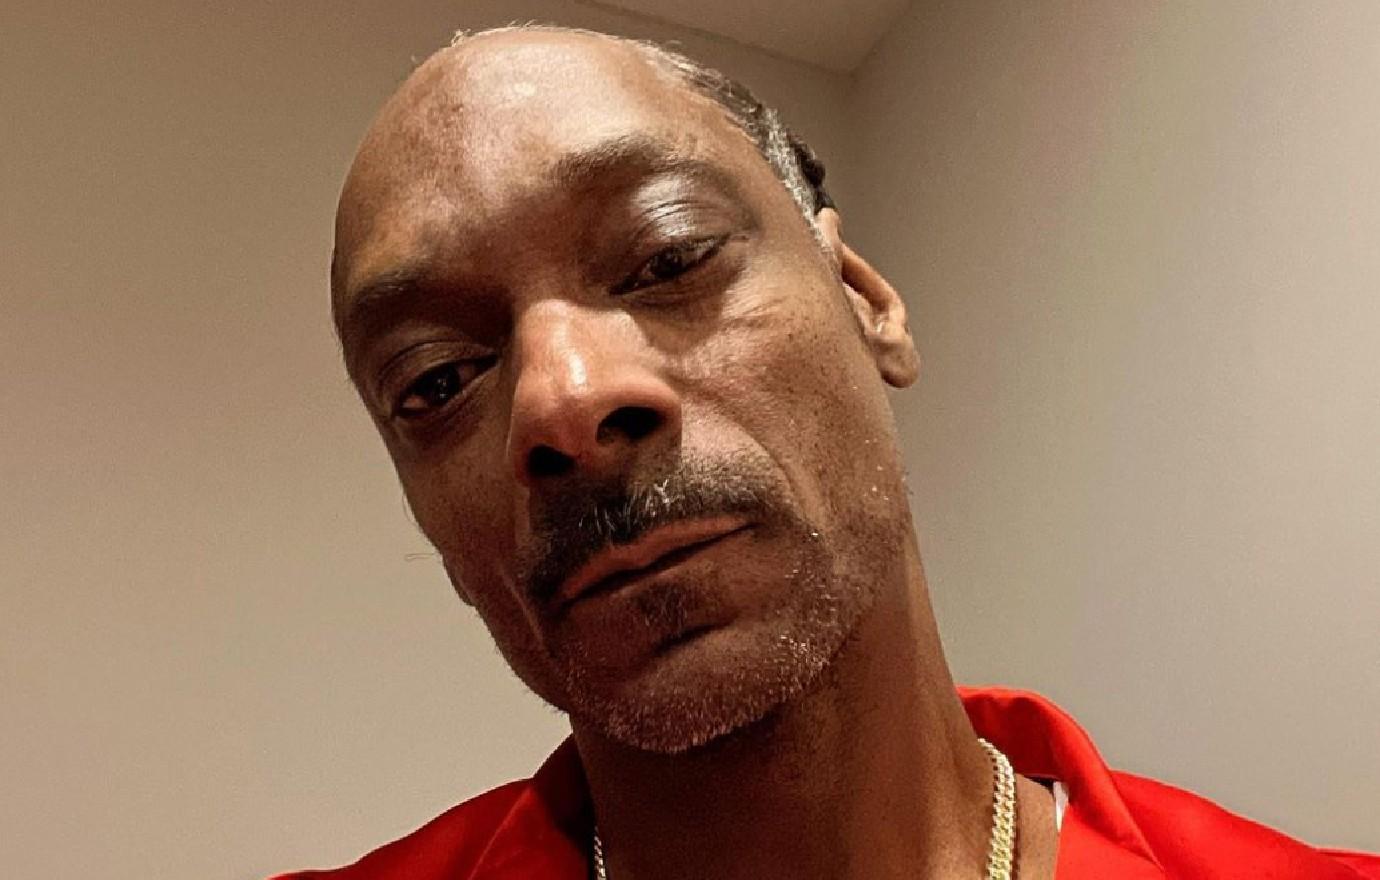 Stream Trash Bags (feat. K CAMP) by Snoop Dogg